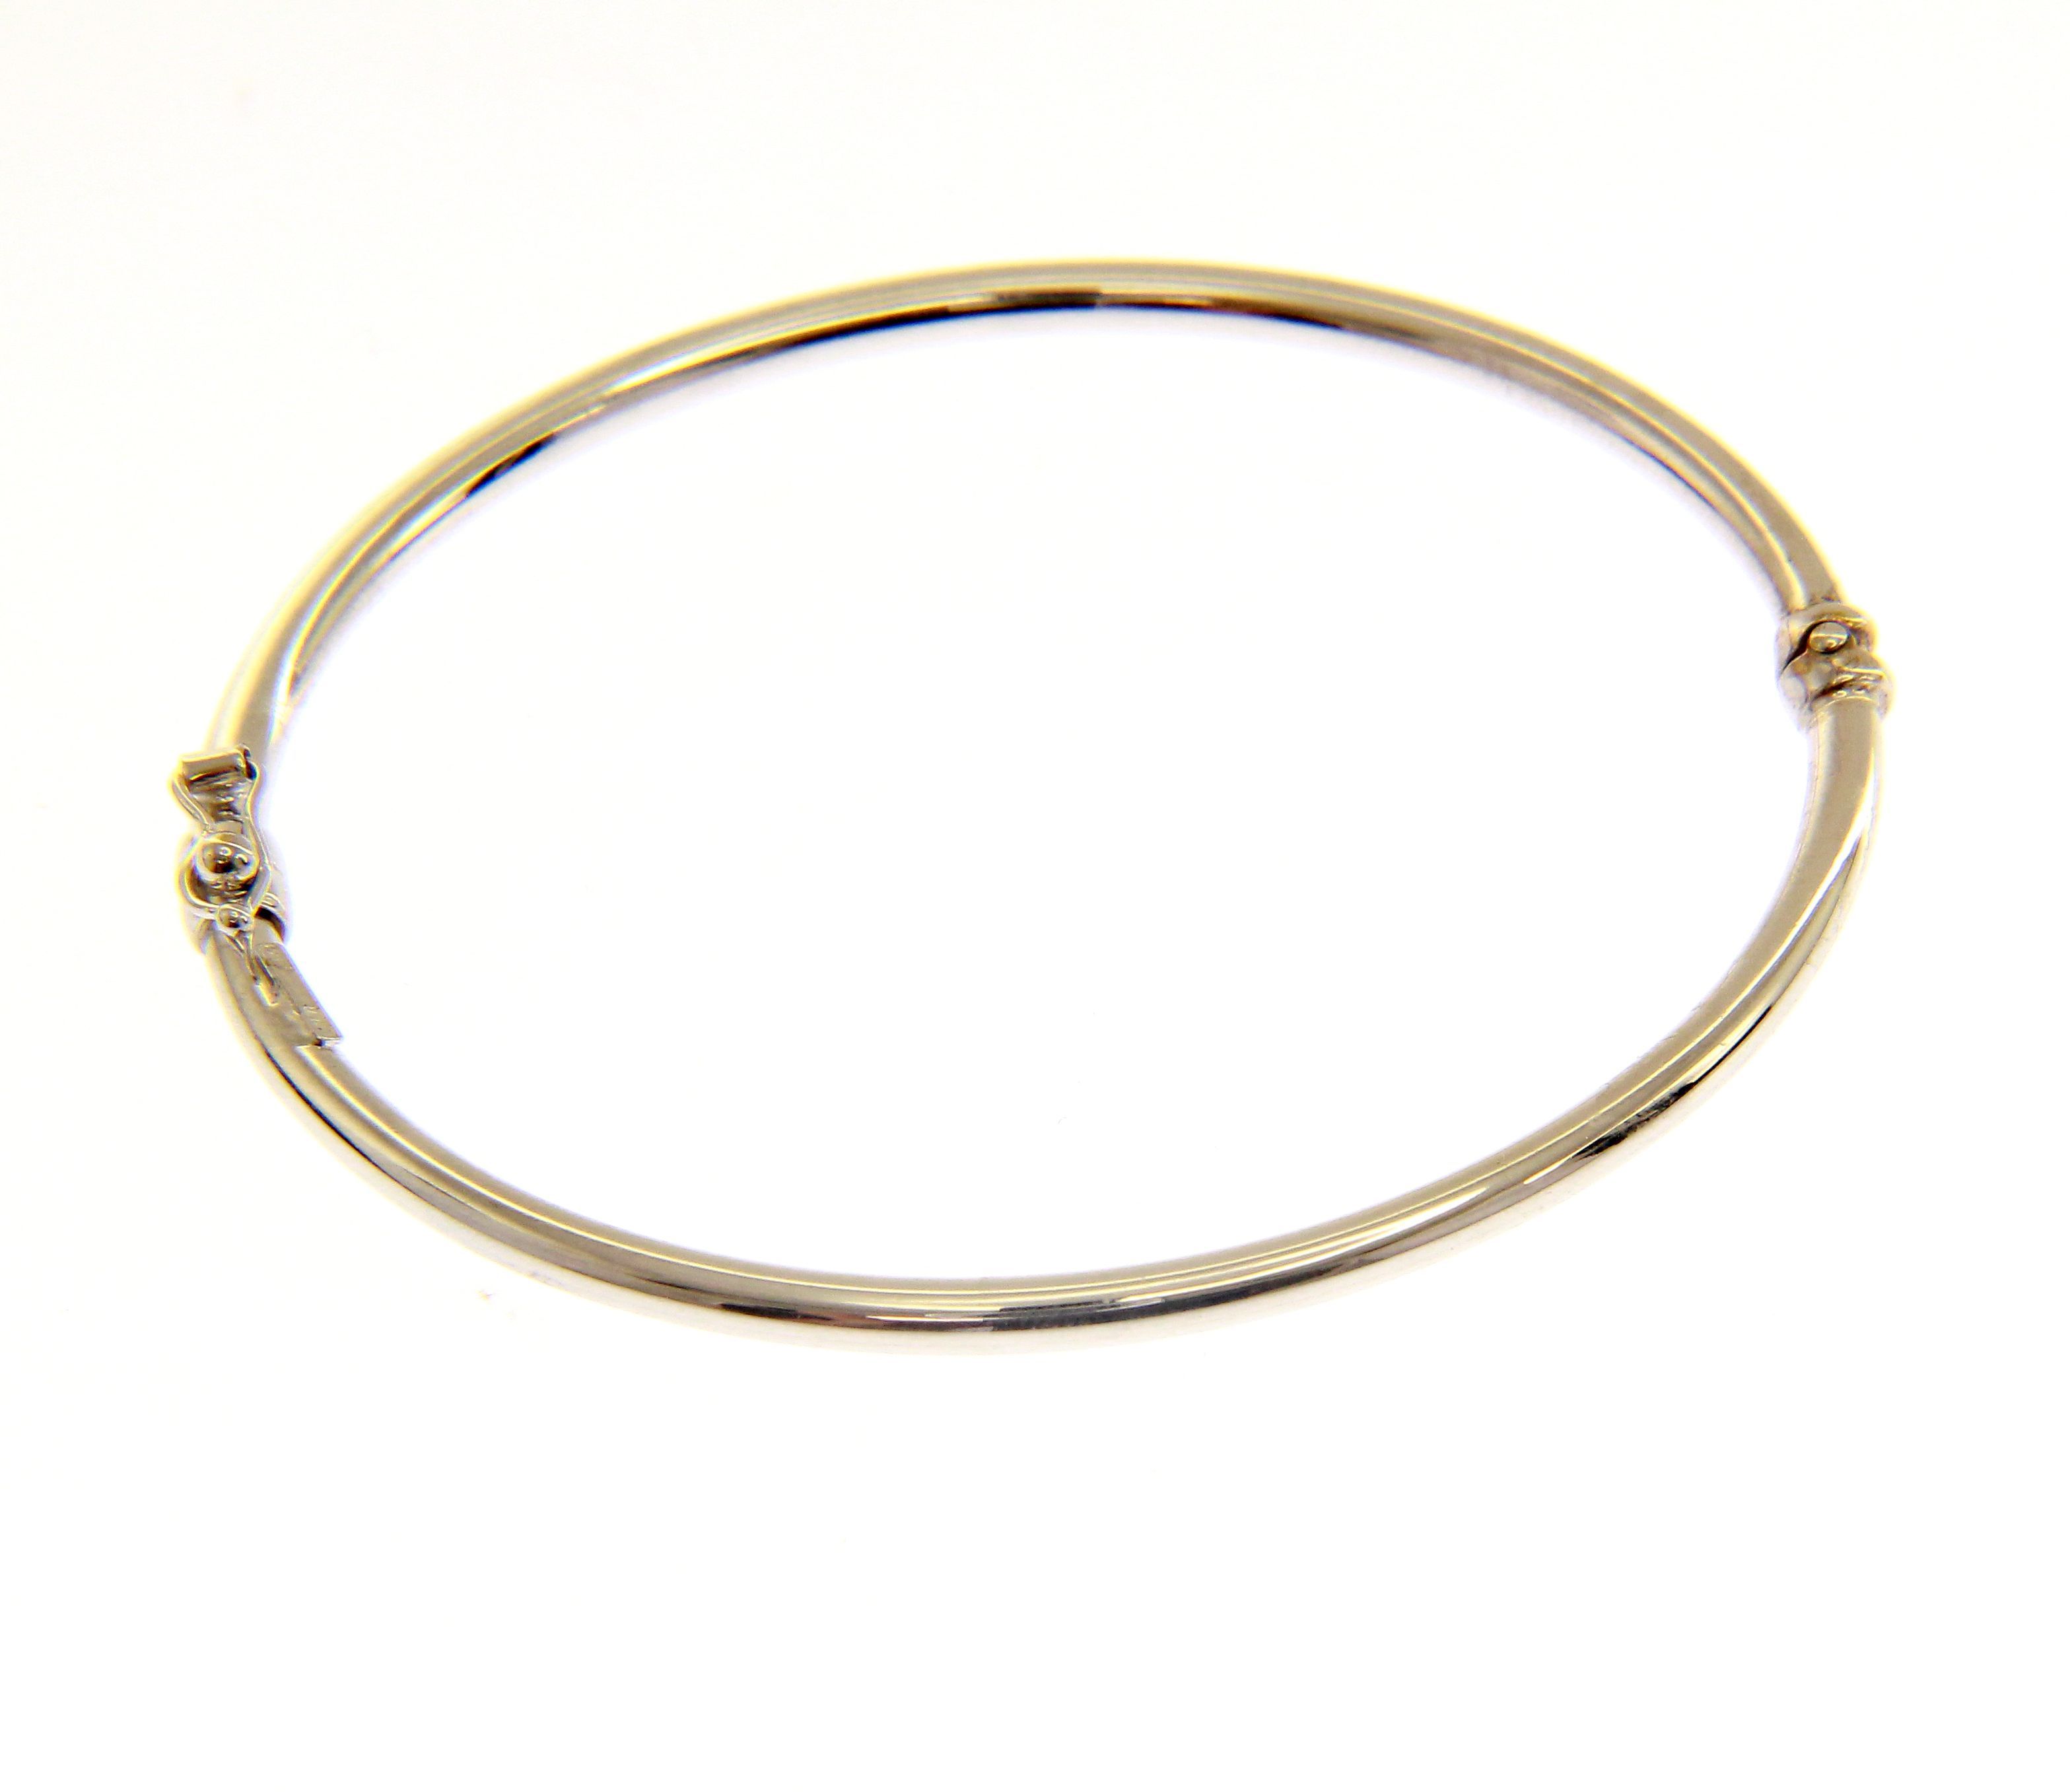 White gold oval bracelet with clasp k14 (code S205135)